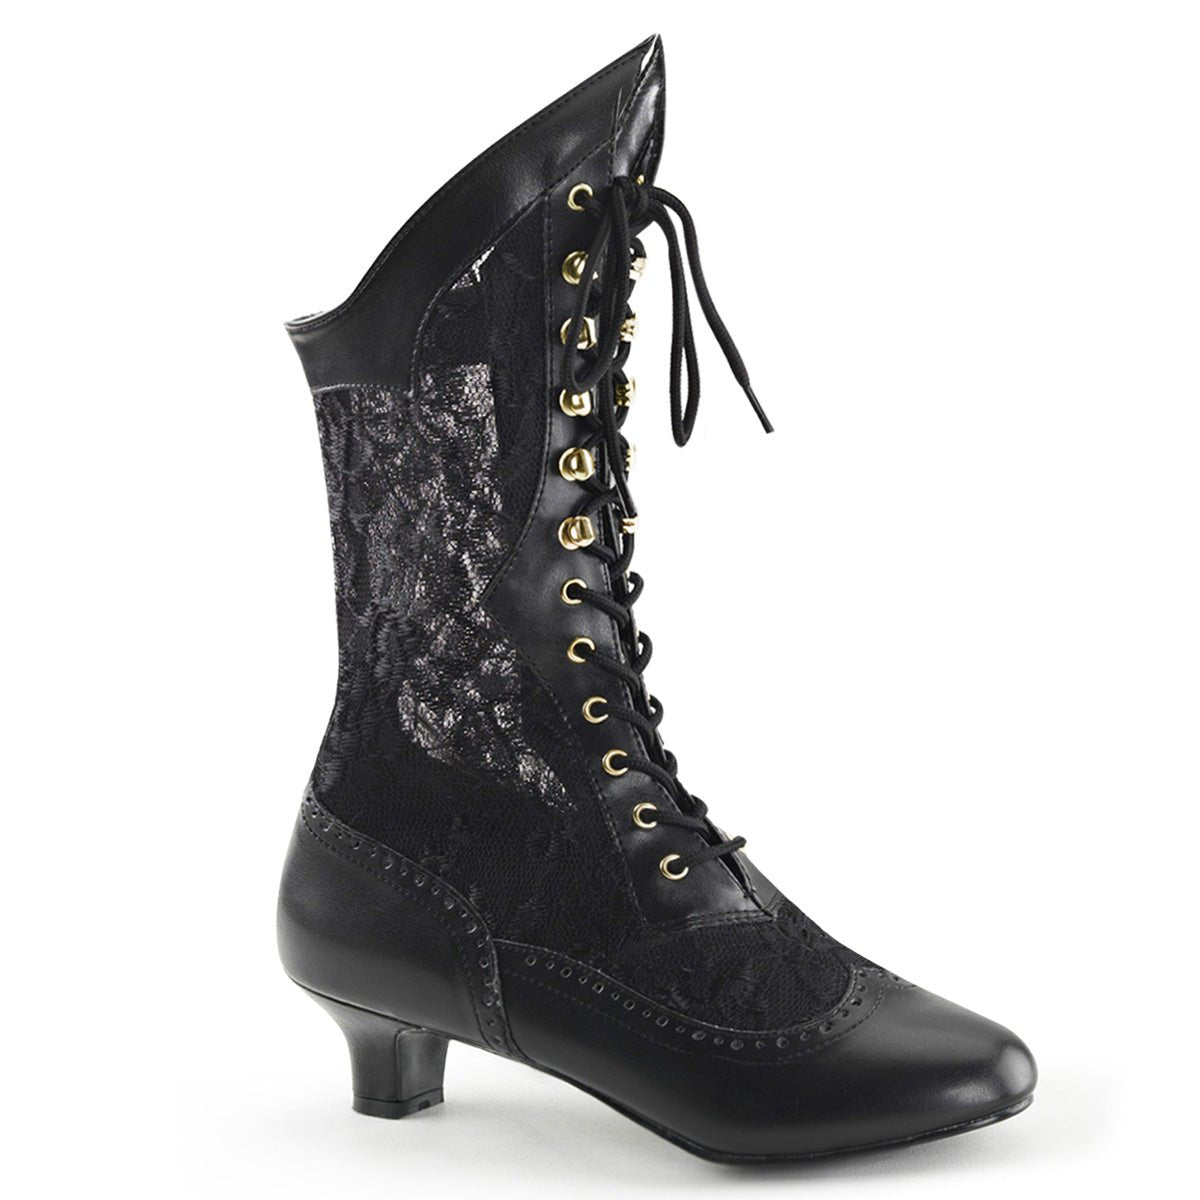 Clearance Funtasma Dame 115 Black Size 4UK/7USA - From Clearance Sold By Alternative Footwear